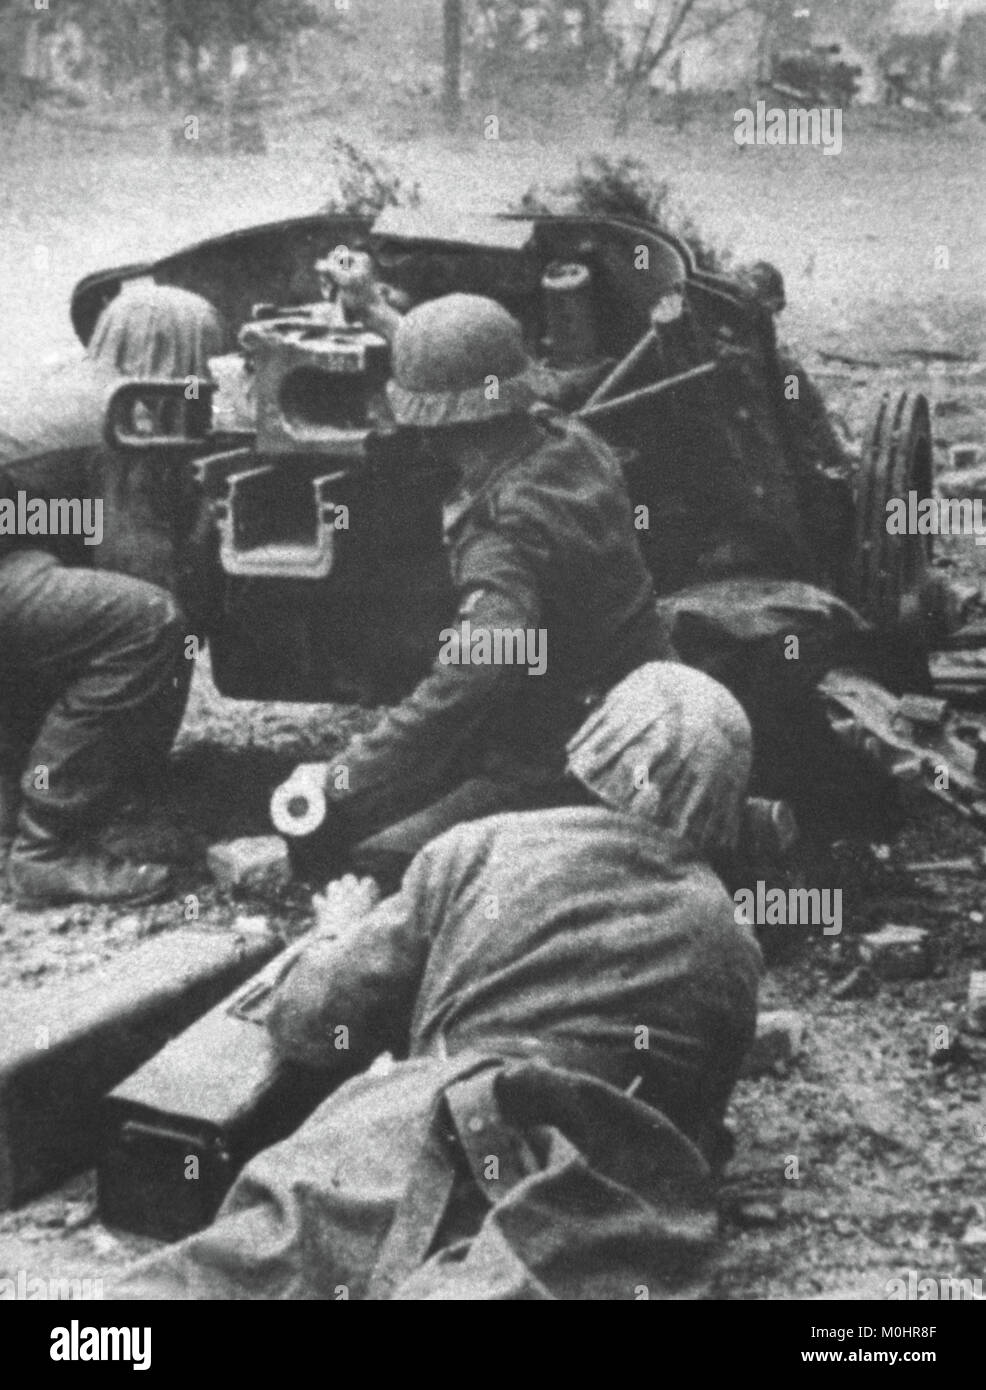 Second World War (1939-1945). USSR. Battle of Stalingrad. Fought between the German and Soviet army (August 1942- February 1943). German soldiers firing an anti-tank weapon PAK 38. Photography. Stock Photo